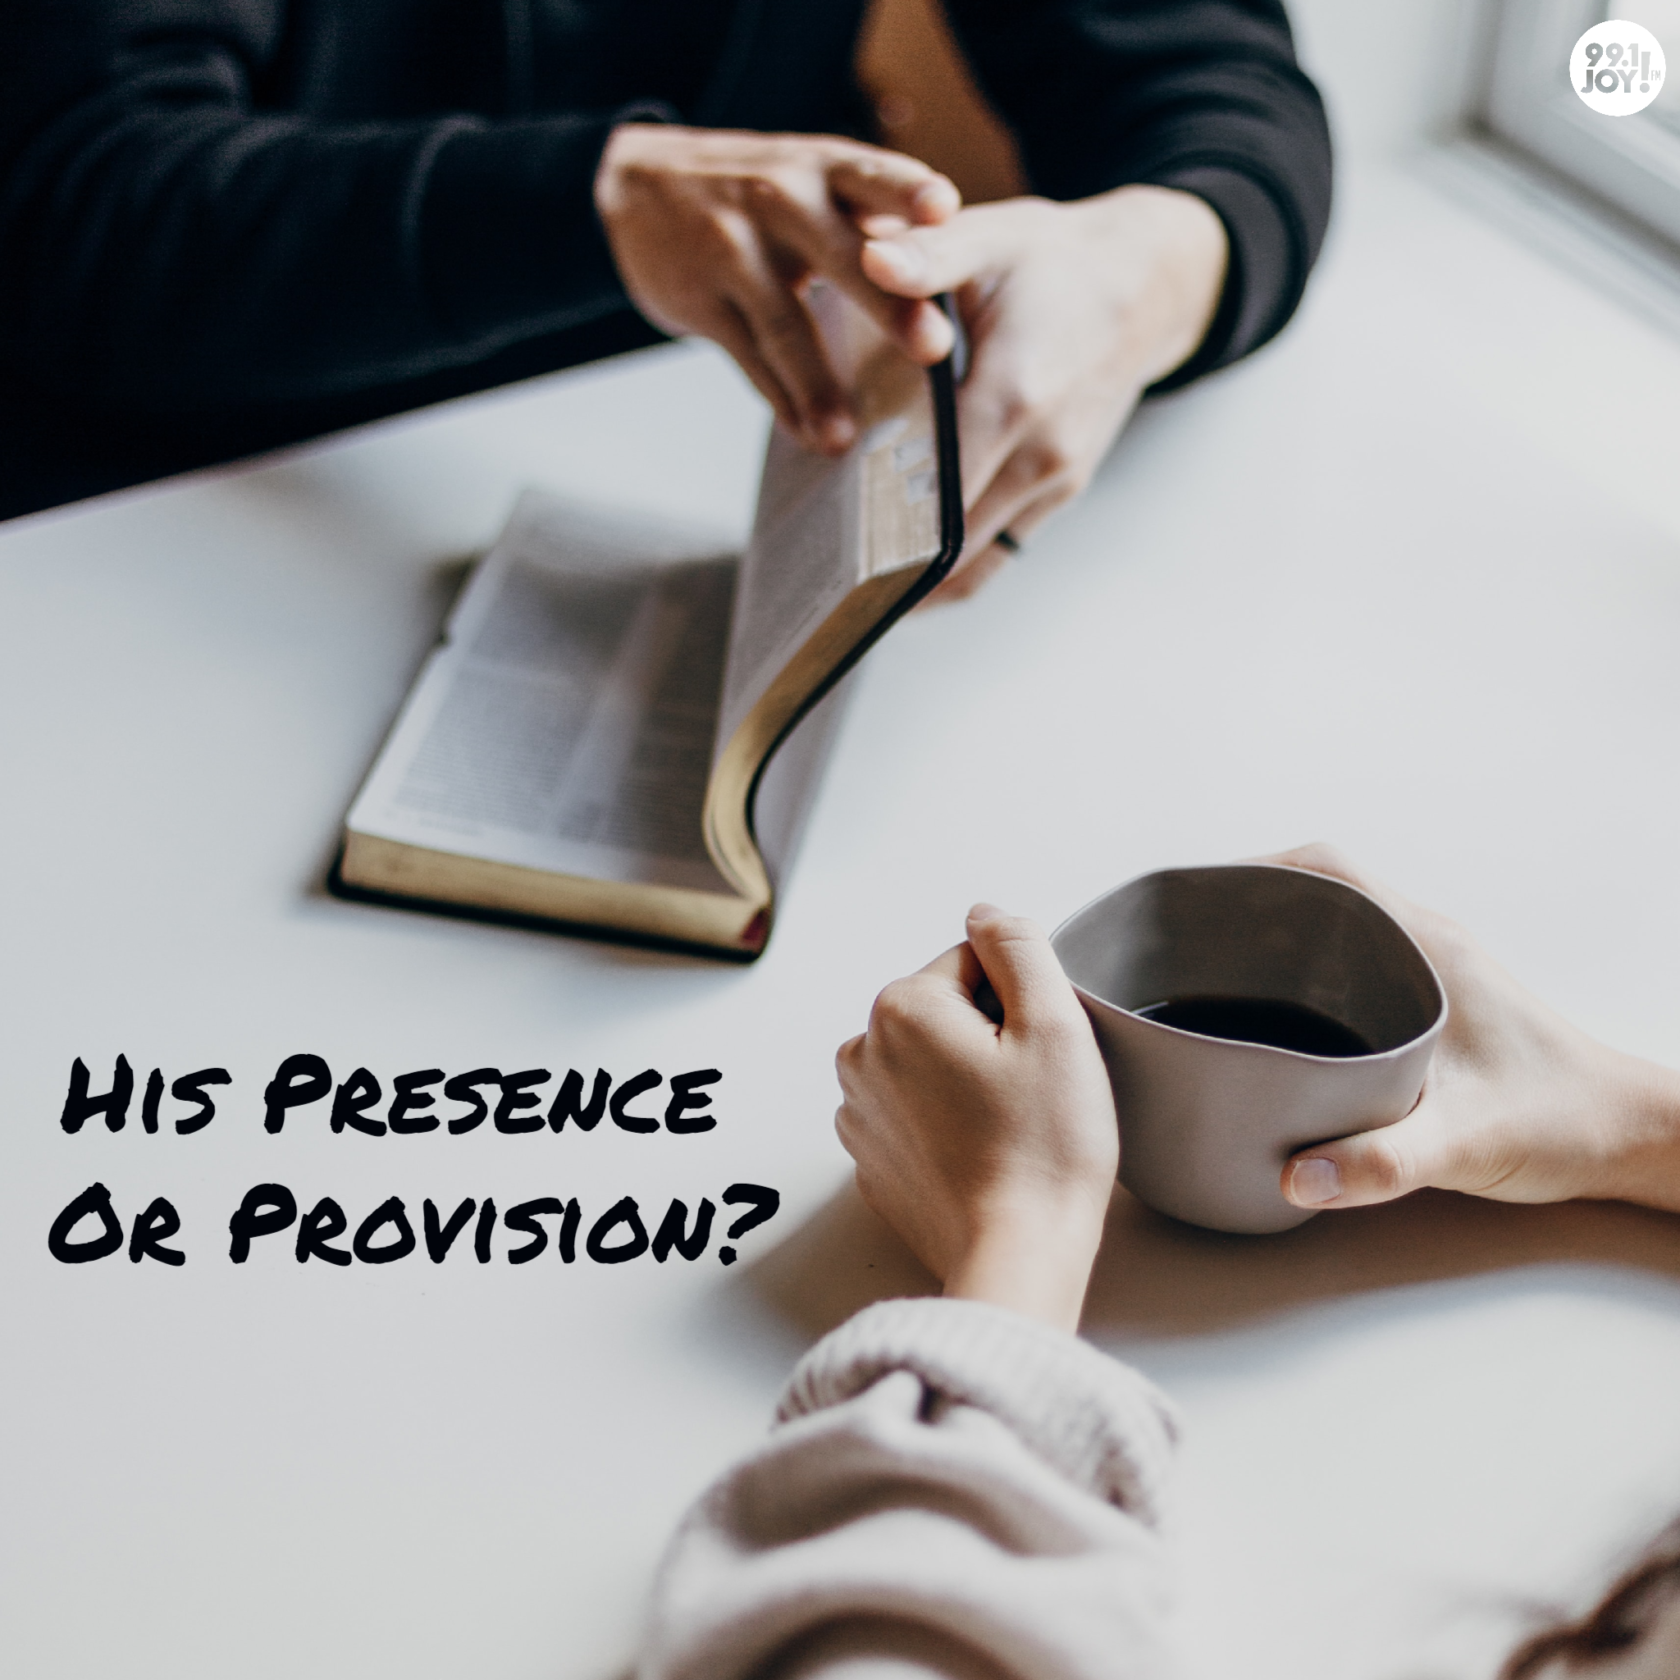 His Presence Or His Provision?